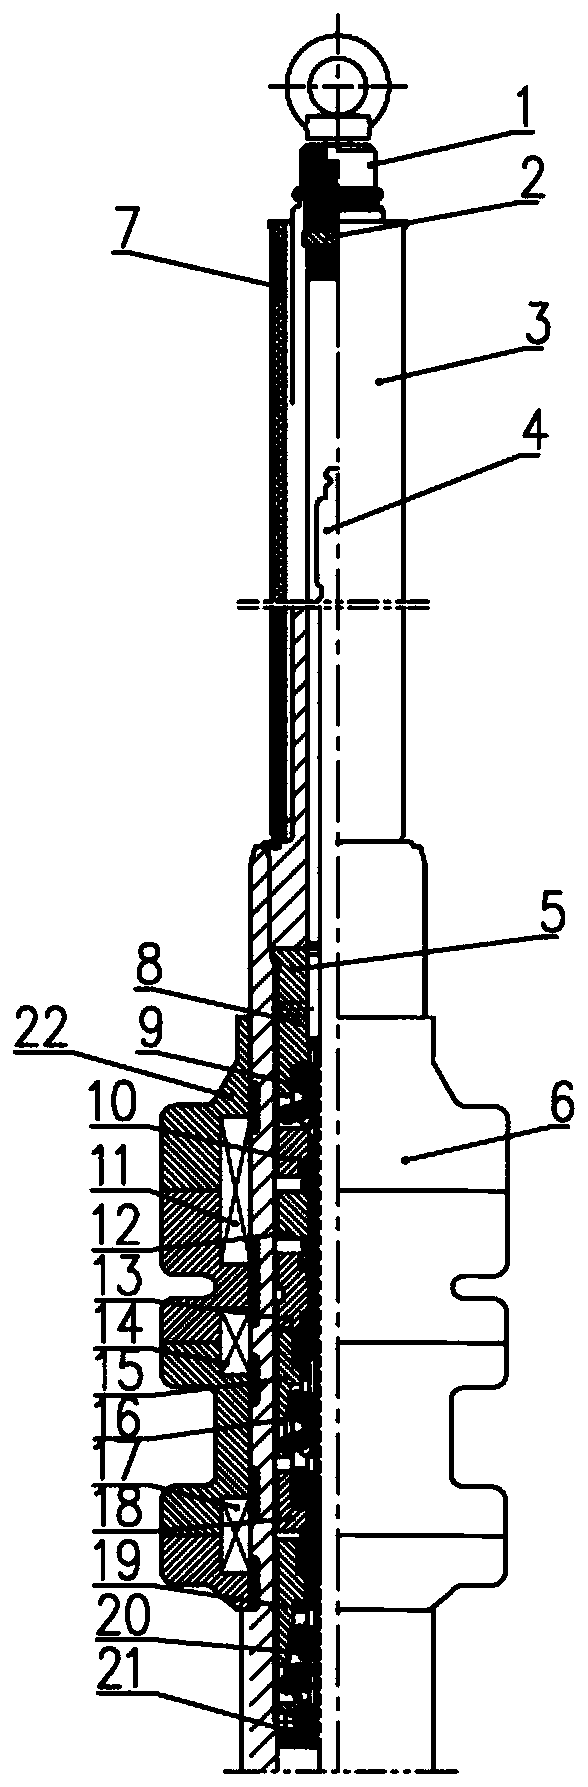 Control rod driving mechanism for ship reactor